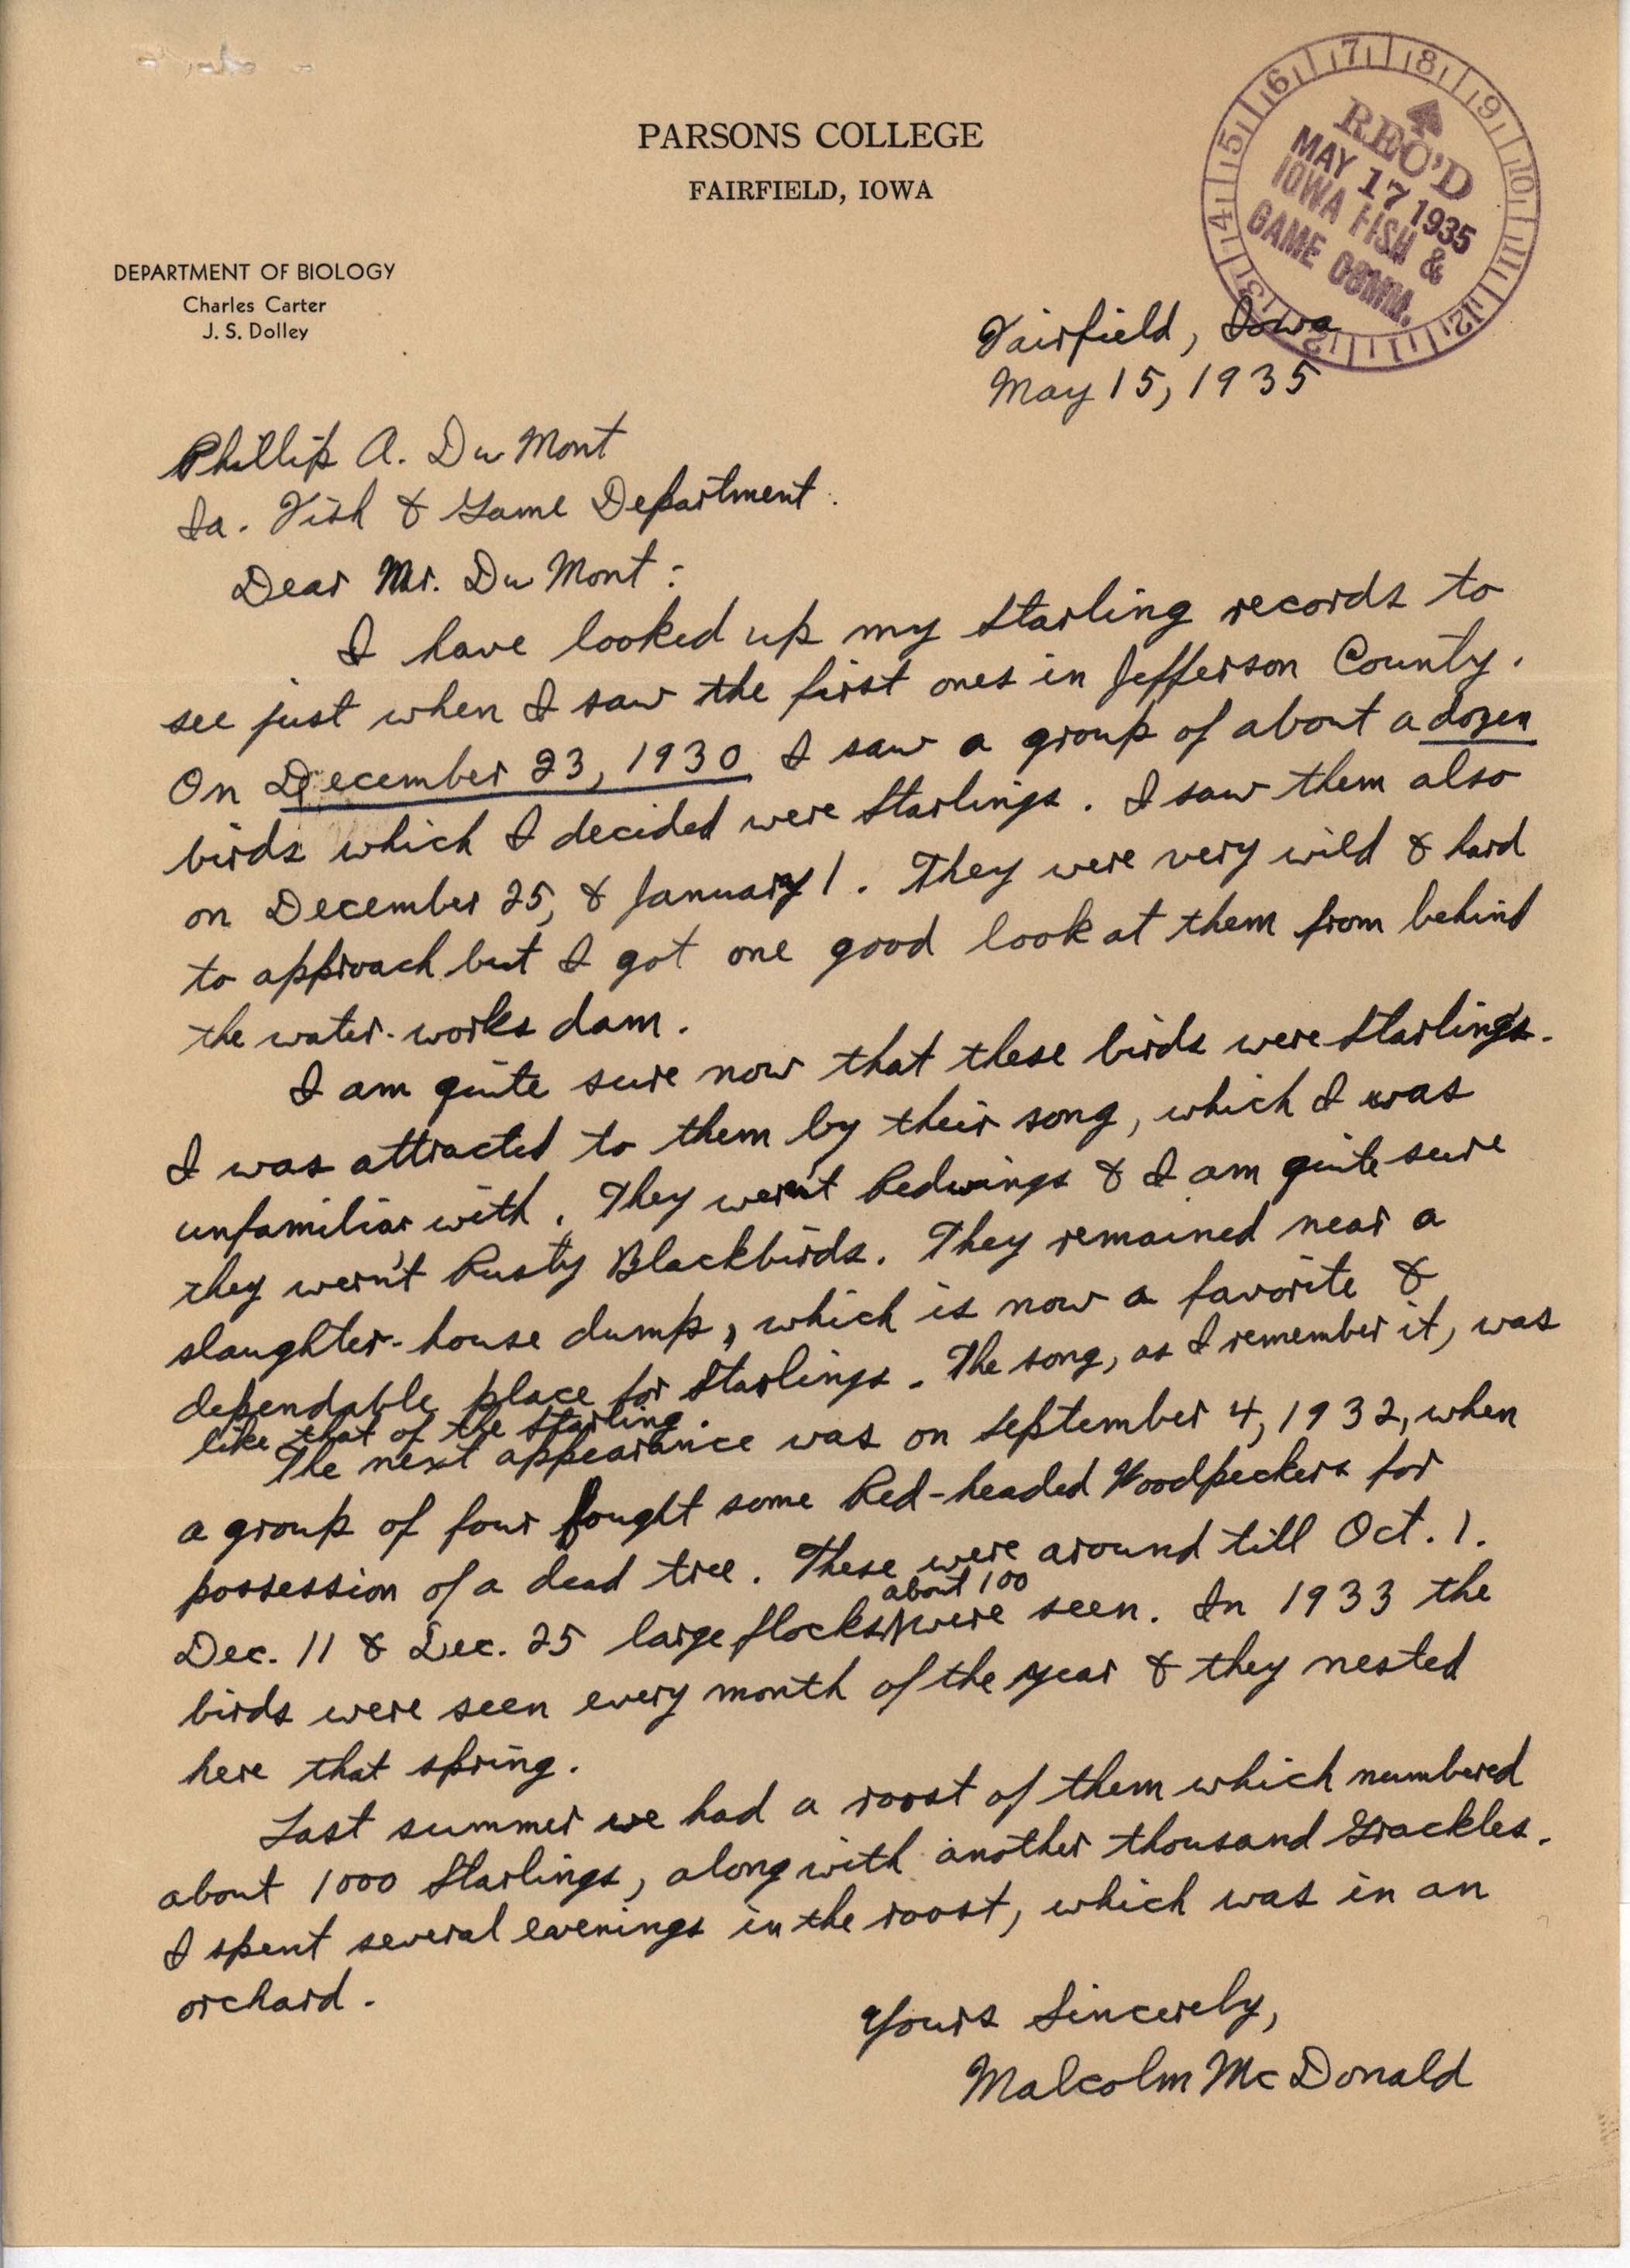 Malcolm McDonald letter to Philip DuMont regarding Starling sightings, May 15, 1935